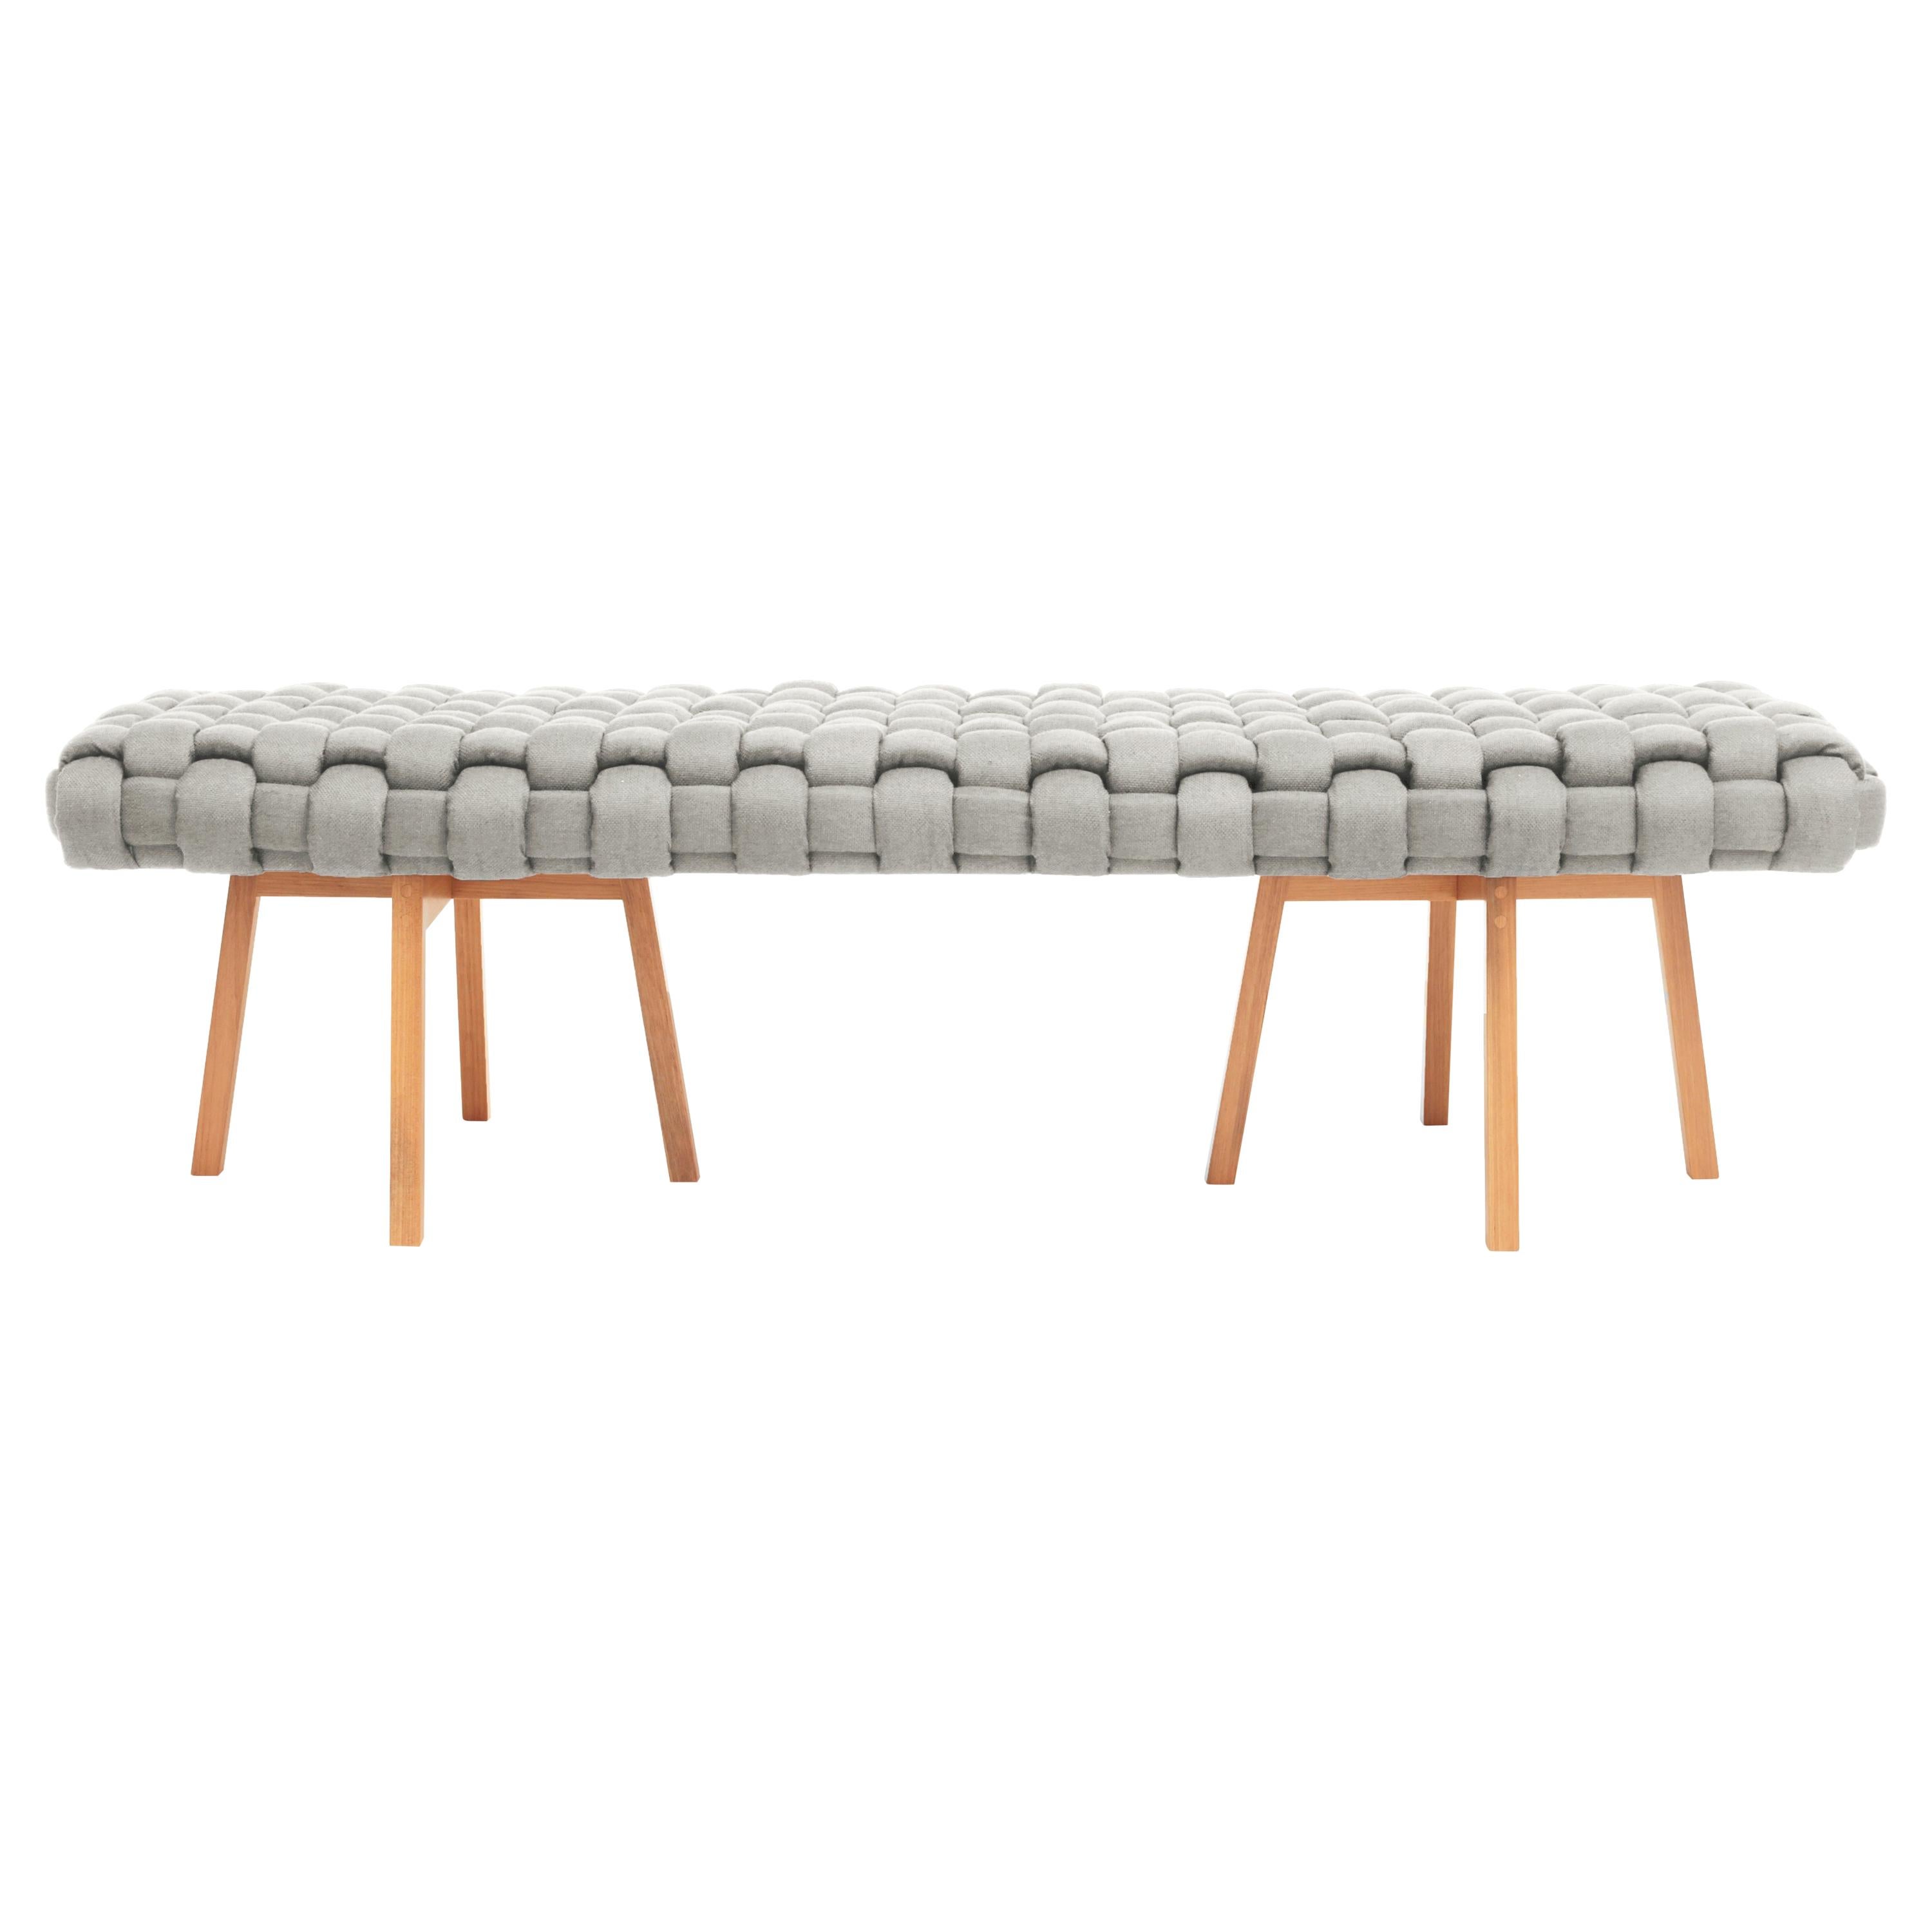 Contemporary Wood Bench, Handwoven Upholstery, the "Trama", Grey